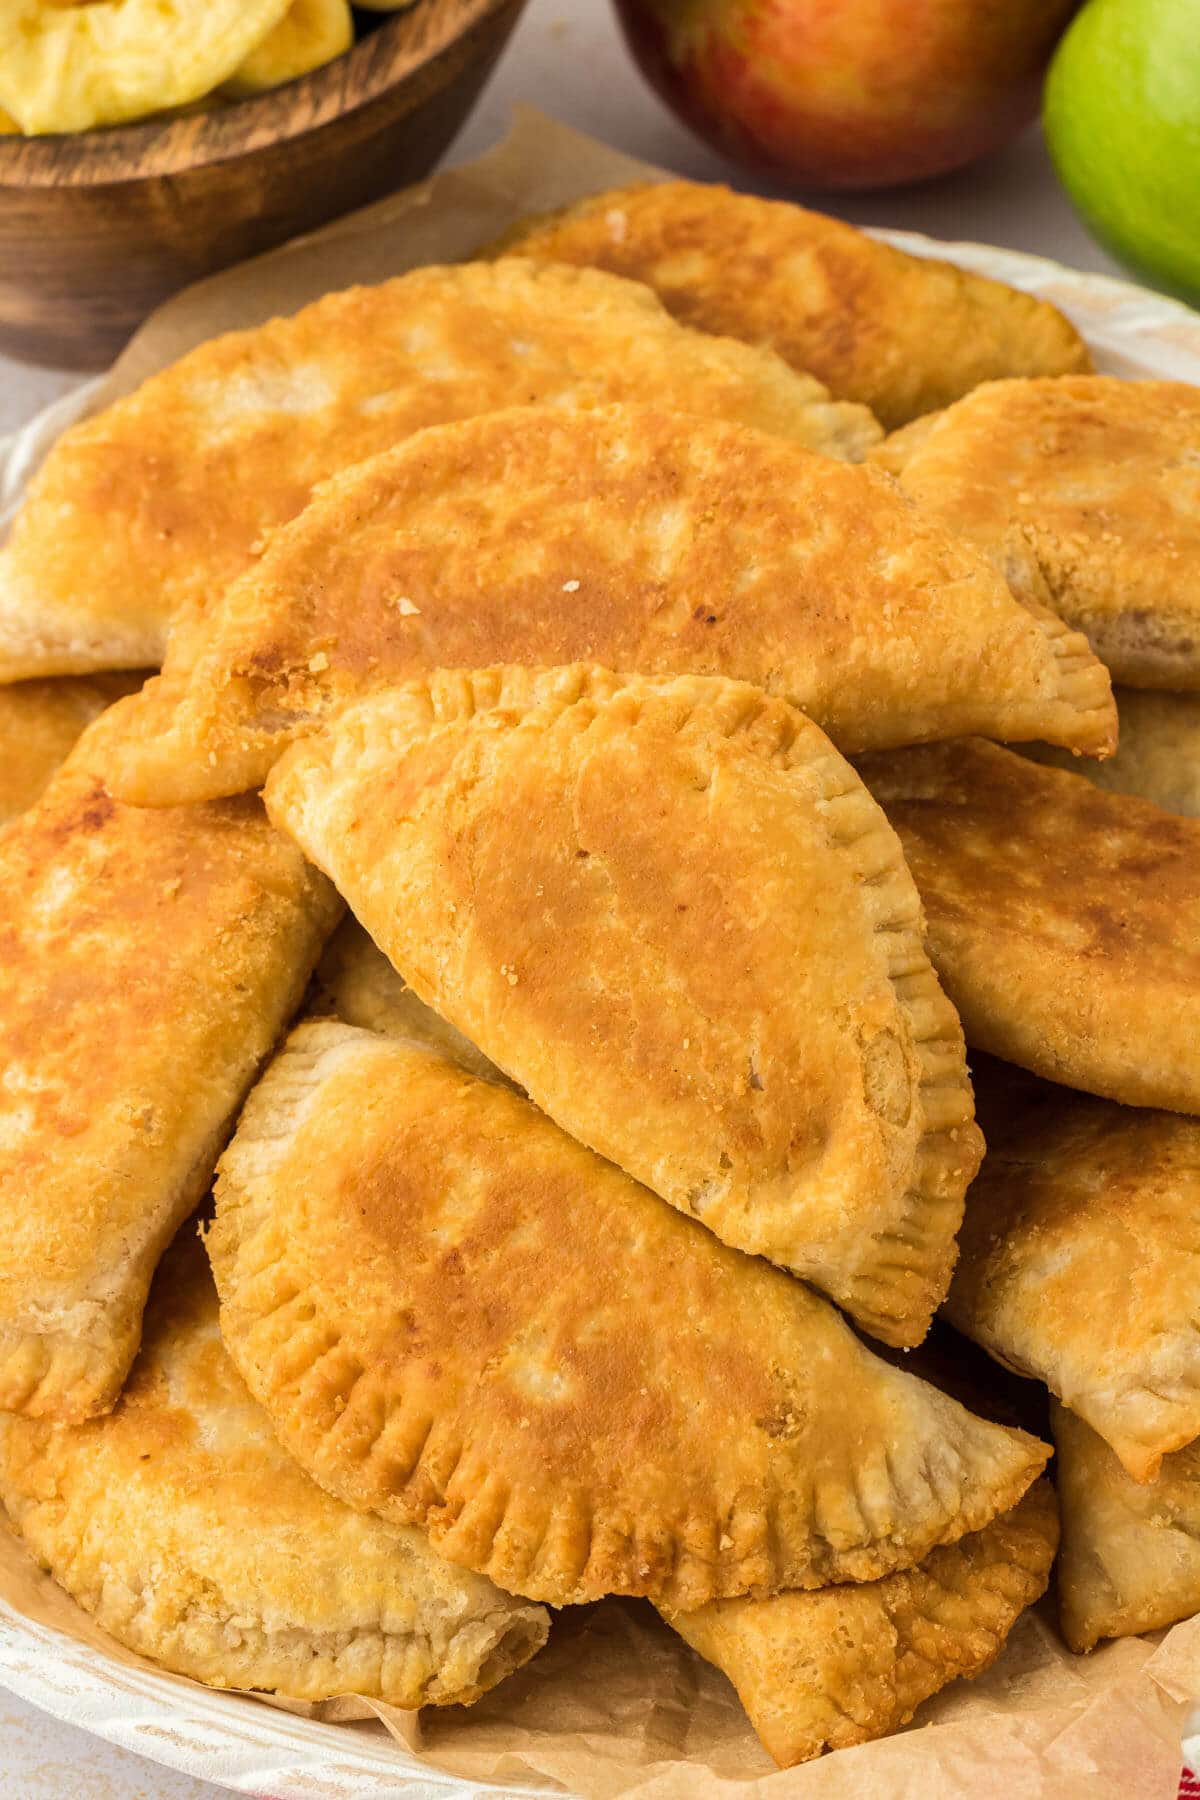 A platter of fried apple pies.